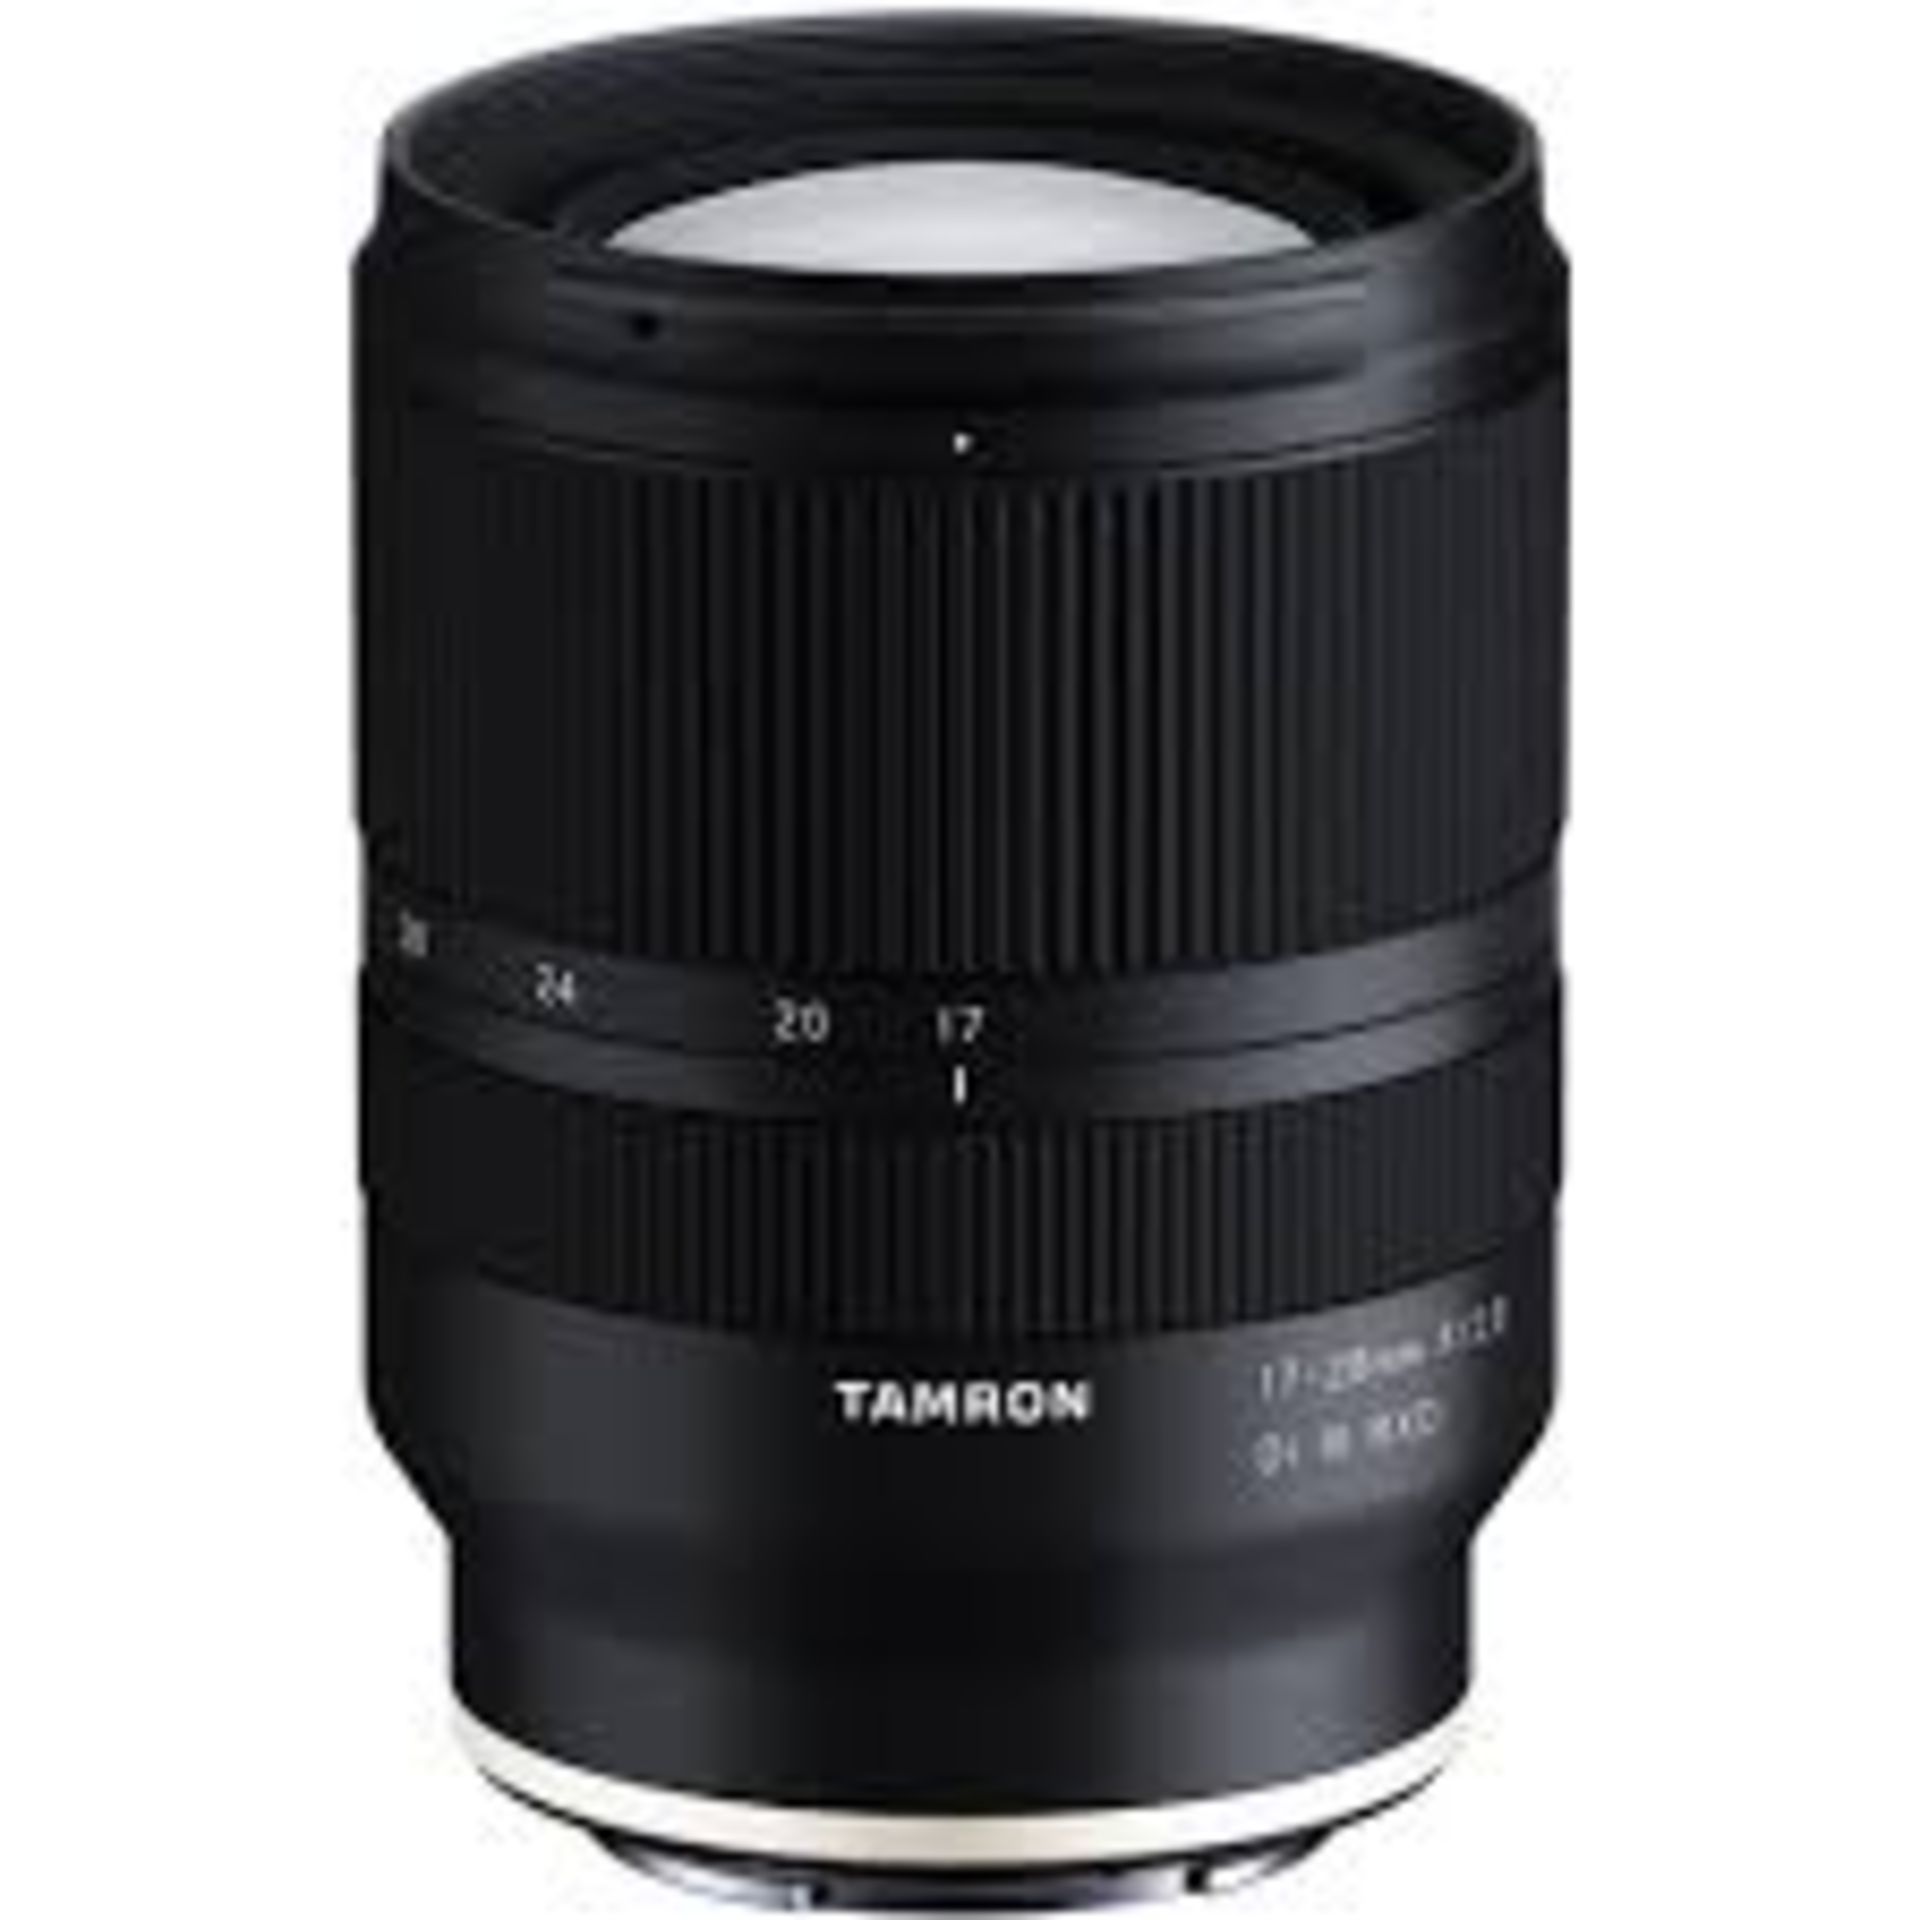 Tamron 17 - 28mm f 2.8 Di III RXD Lens Sony E fit